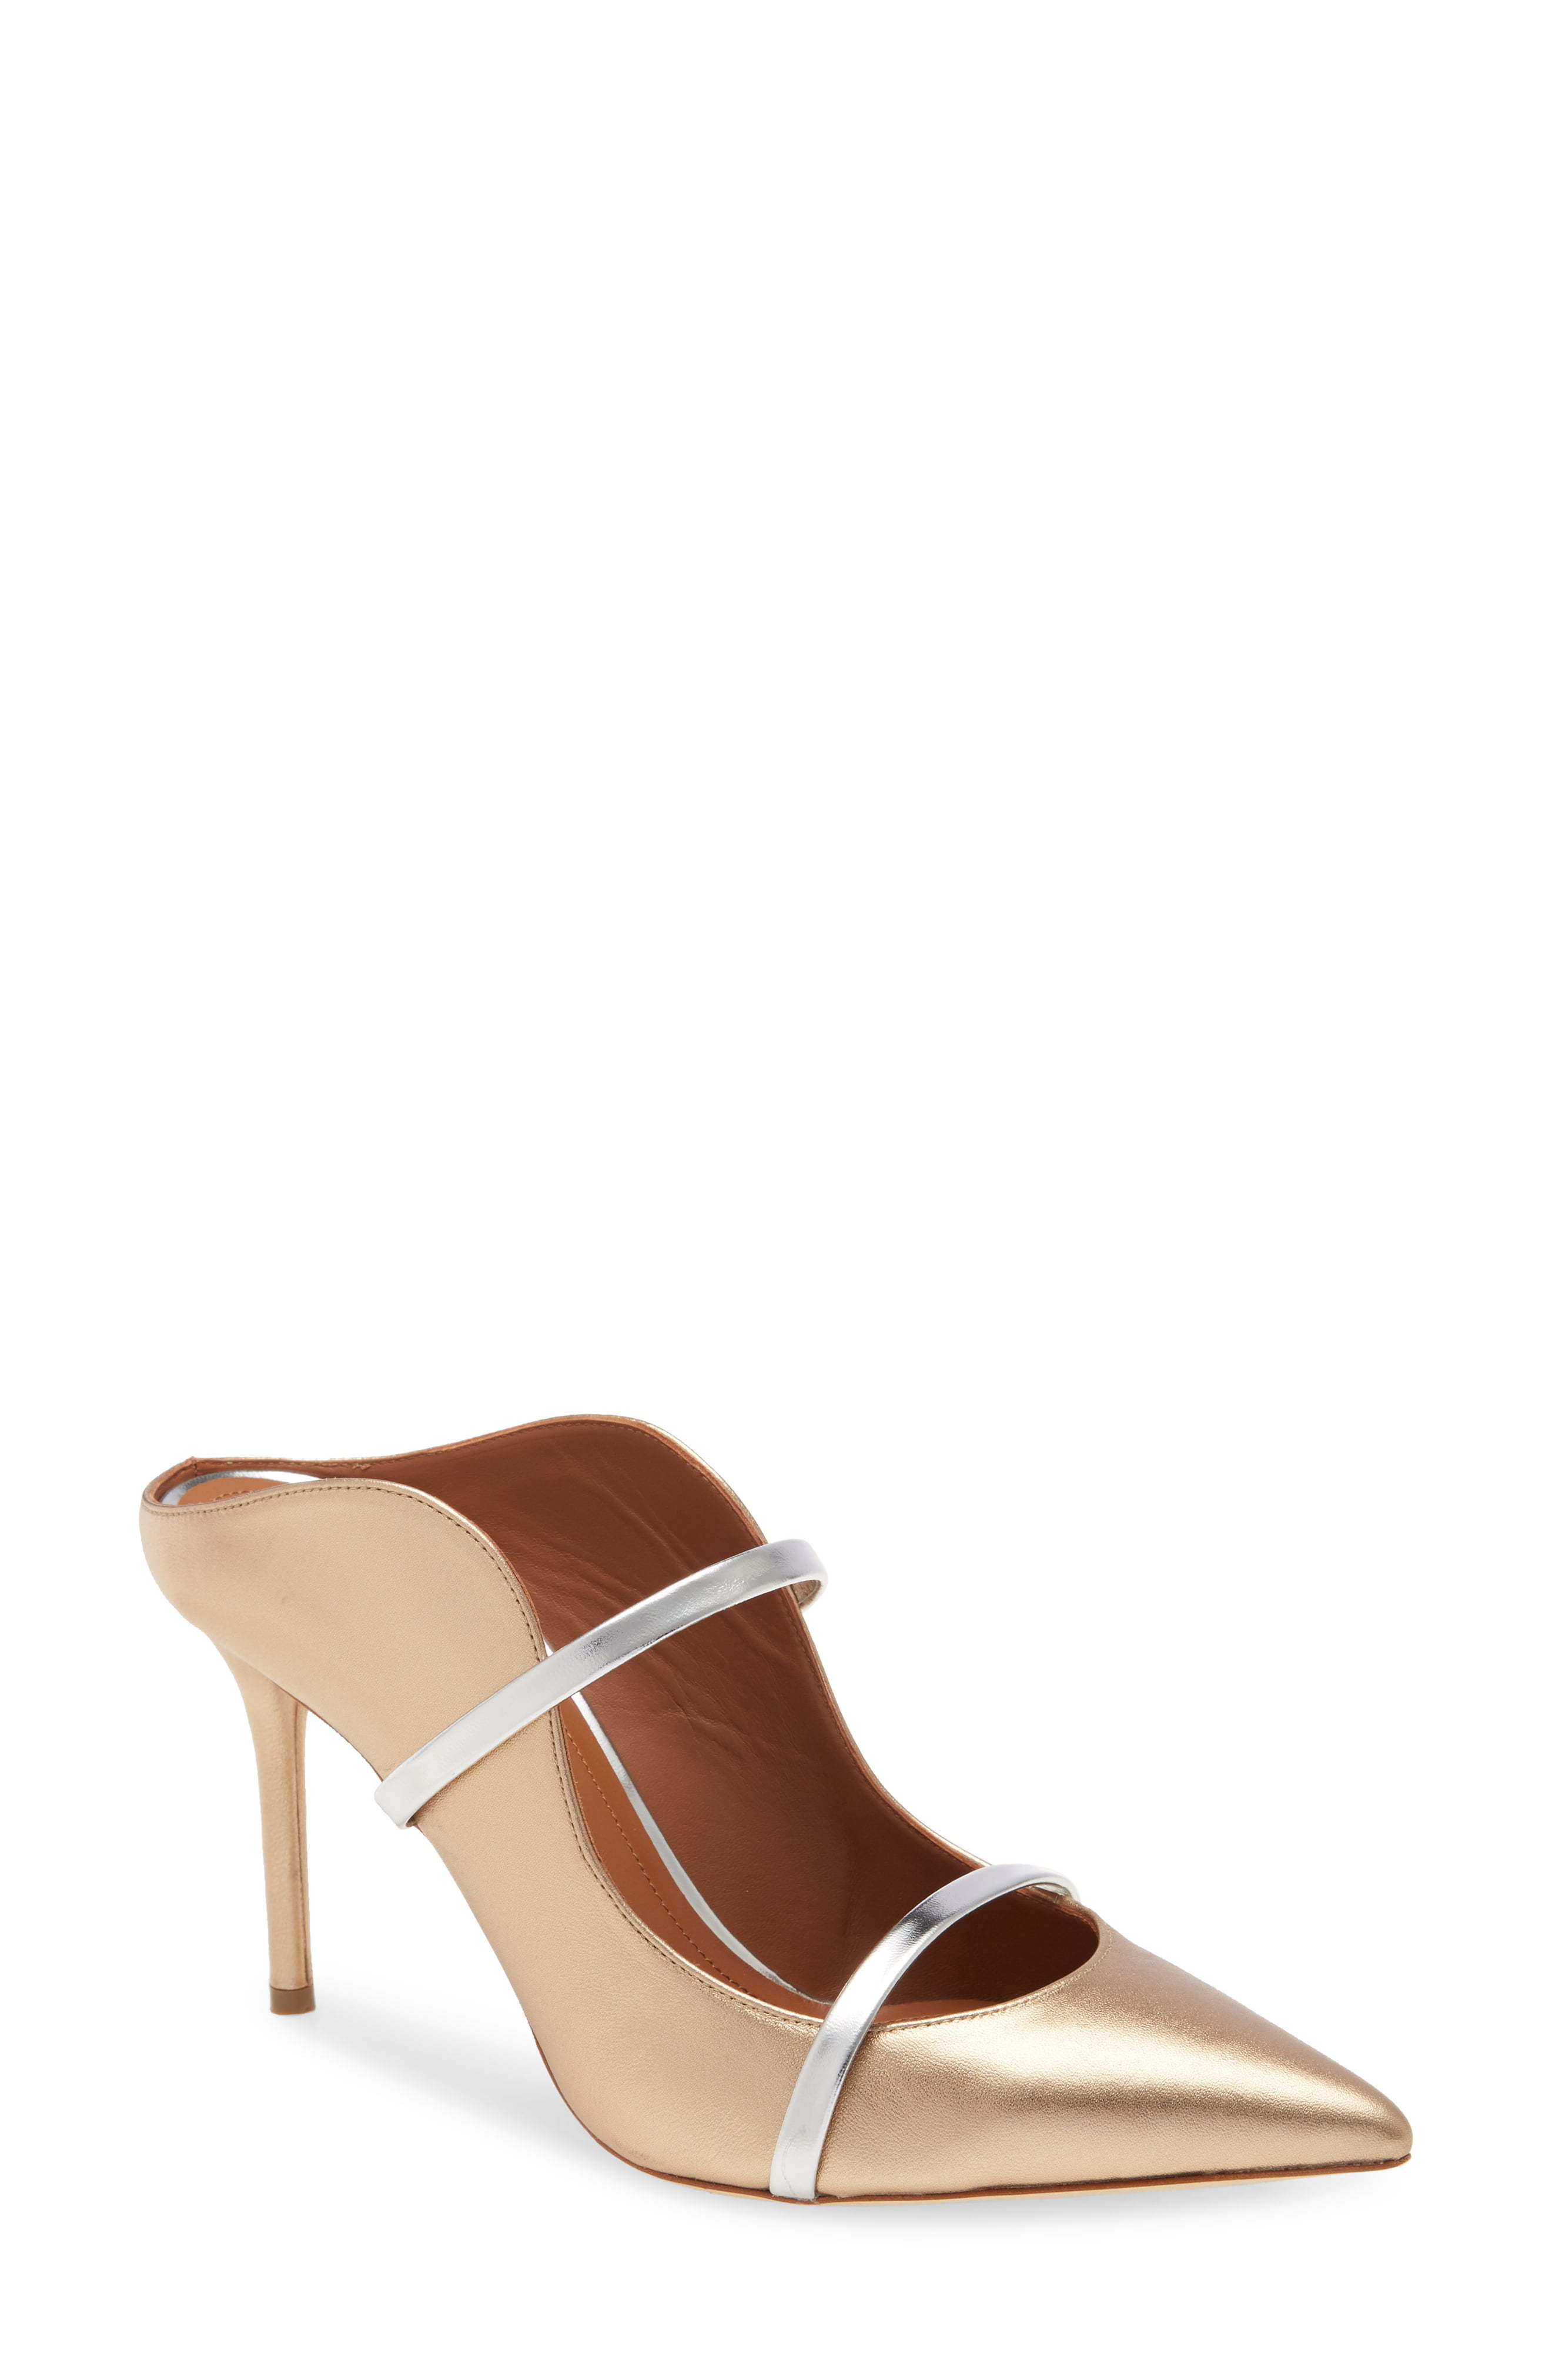 Malone Souliers Maureen Double Band Mule, $357 | Nordstrom | Lookastic